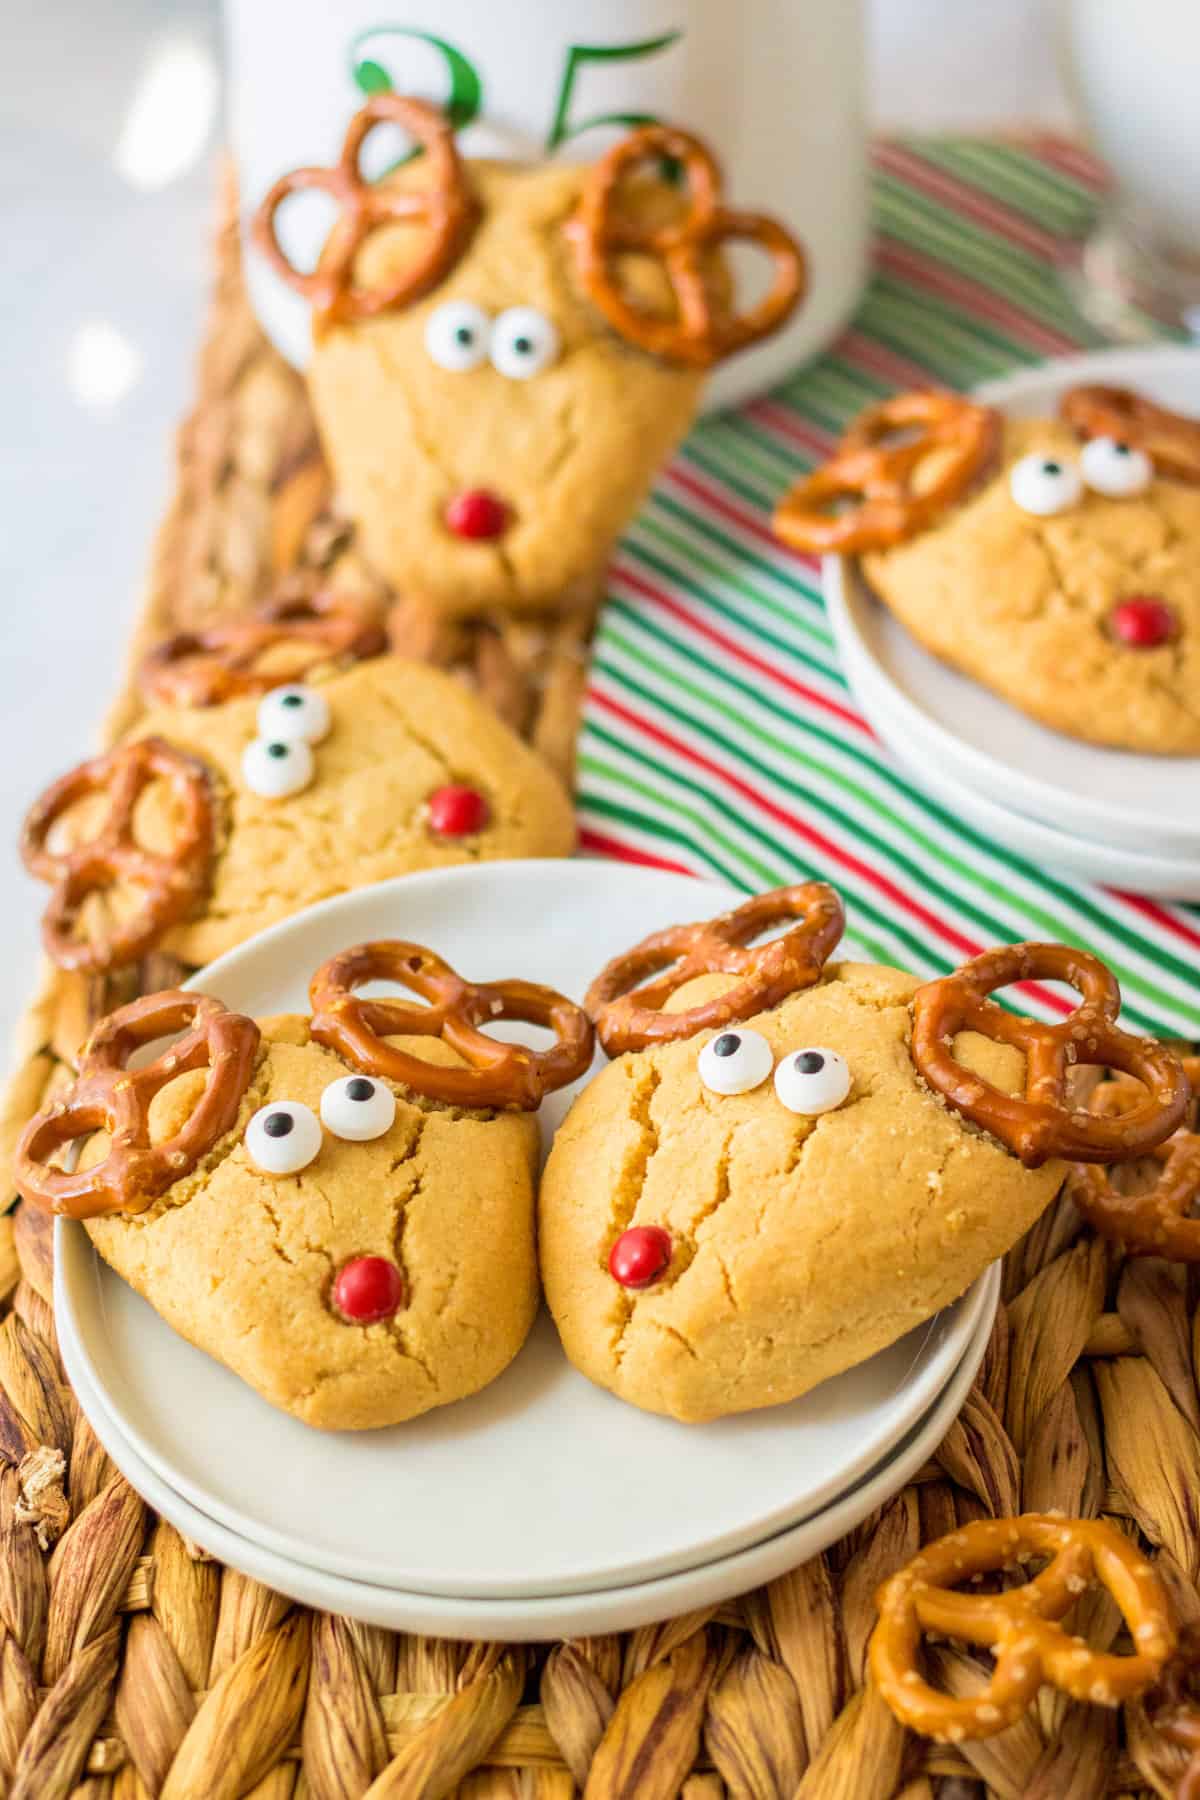 Peanut butter cookies shaped into an upside down triangle and decorated to look like Rudolph with pretzel antlers, candy eyes, and a red nose.